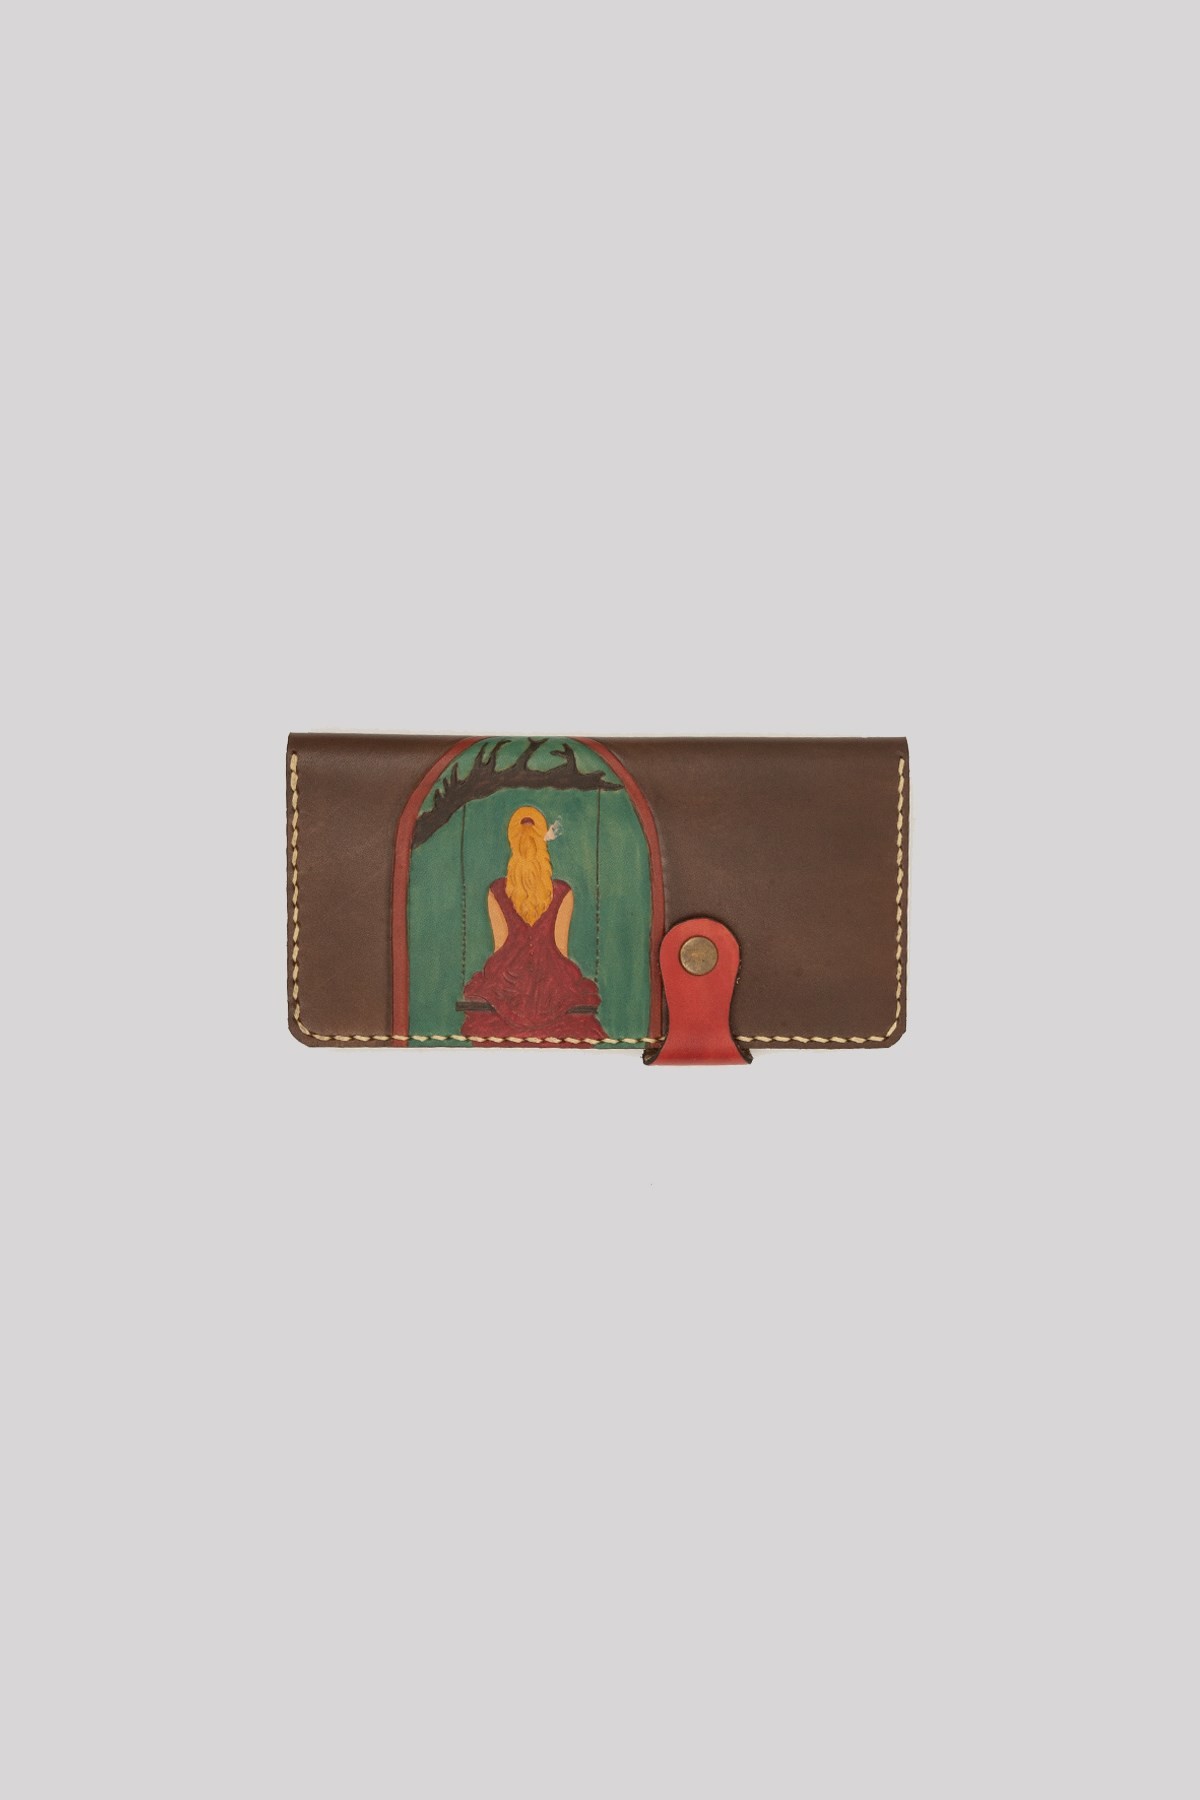 HANDMADE LONELY GIRL PATTERNED WOMAN LEATHER WALLET - BROWN